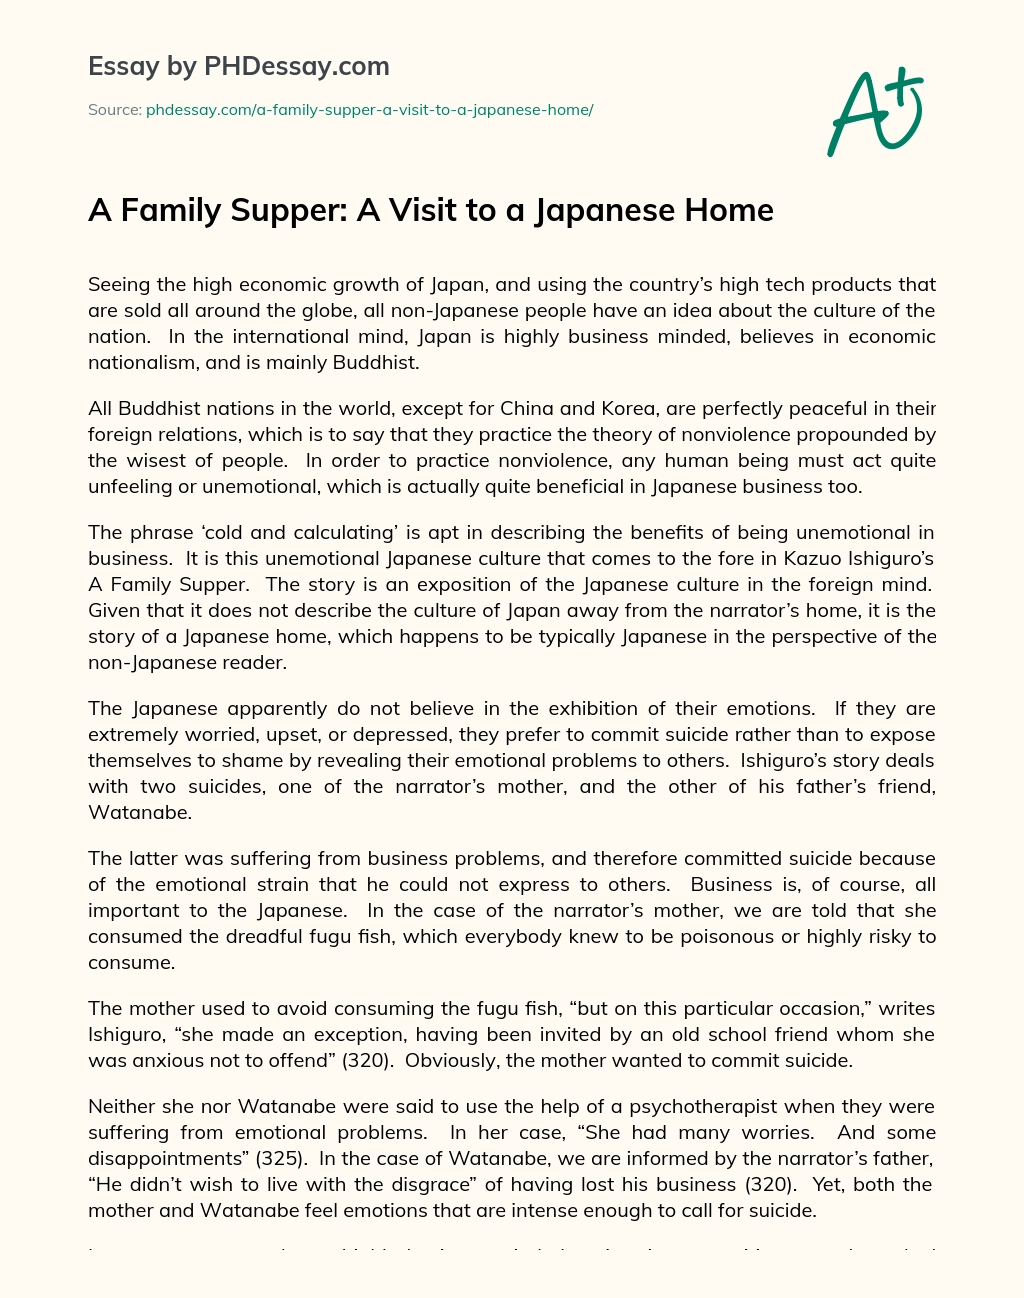 A Family Supper: A Visit to a Japanese Home essay